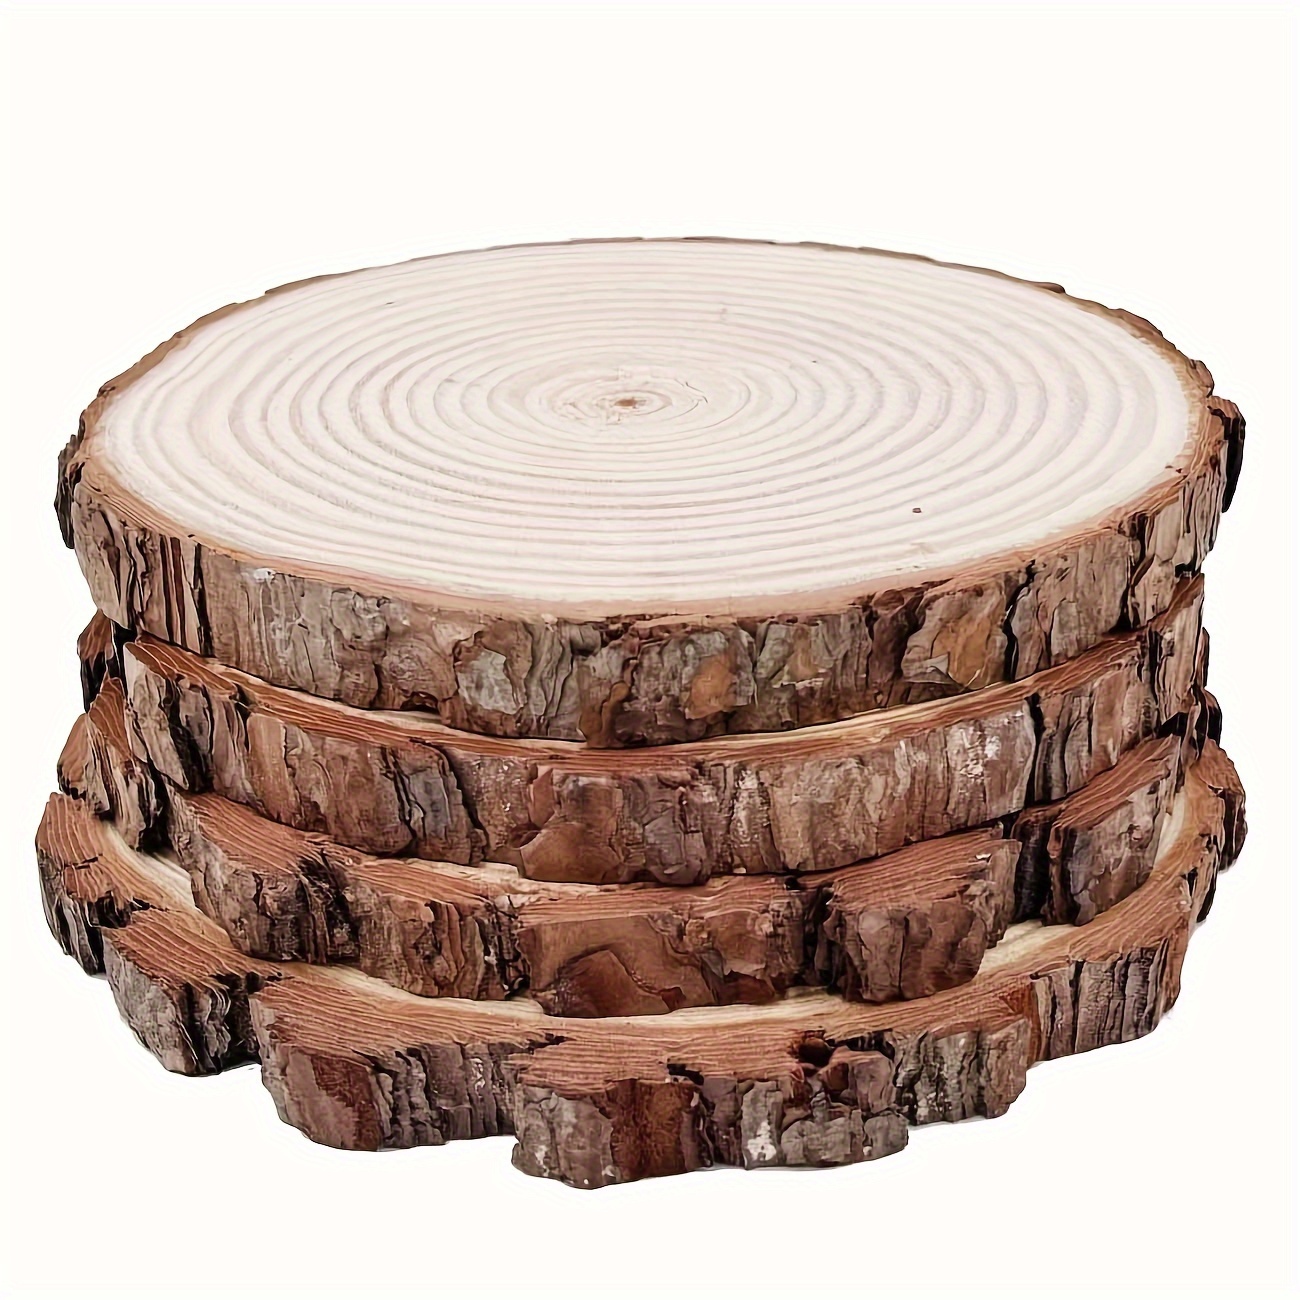 Wood Slices 100 Pcs of Unfinished Wood Chips 4x4 inch Blank Wood Chips for  Handicrafts Home Decoration Wooden Coasters and DIY Crafts 50 Pcs Wood  Squares and 50 Pcs Wood Circles